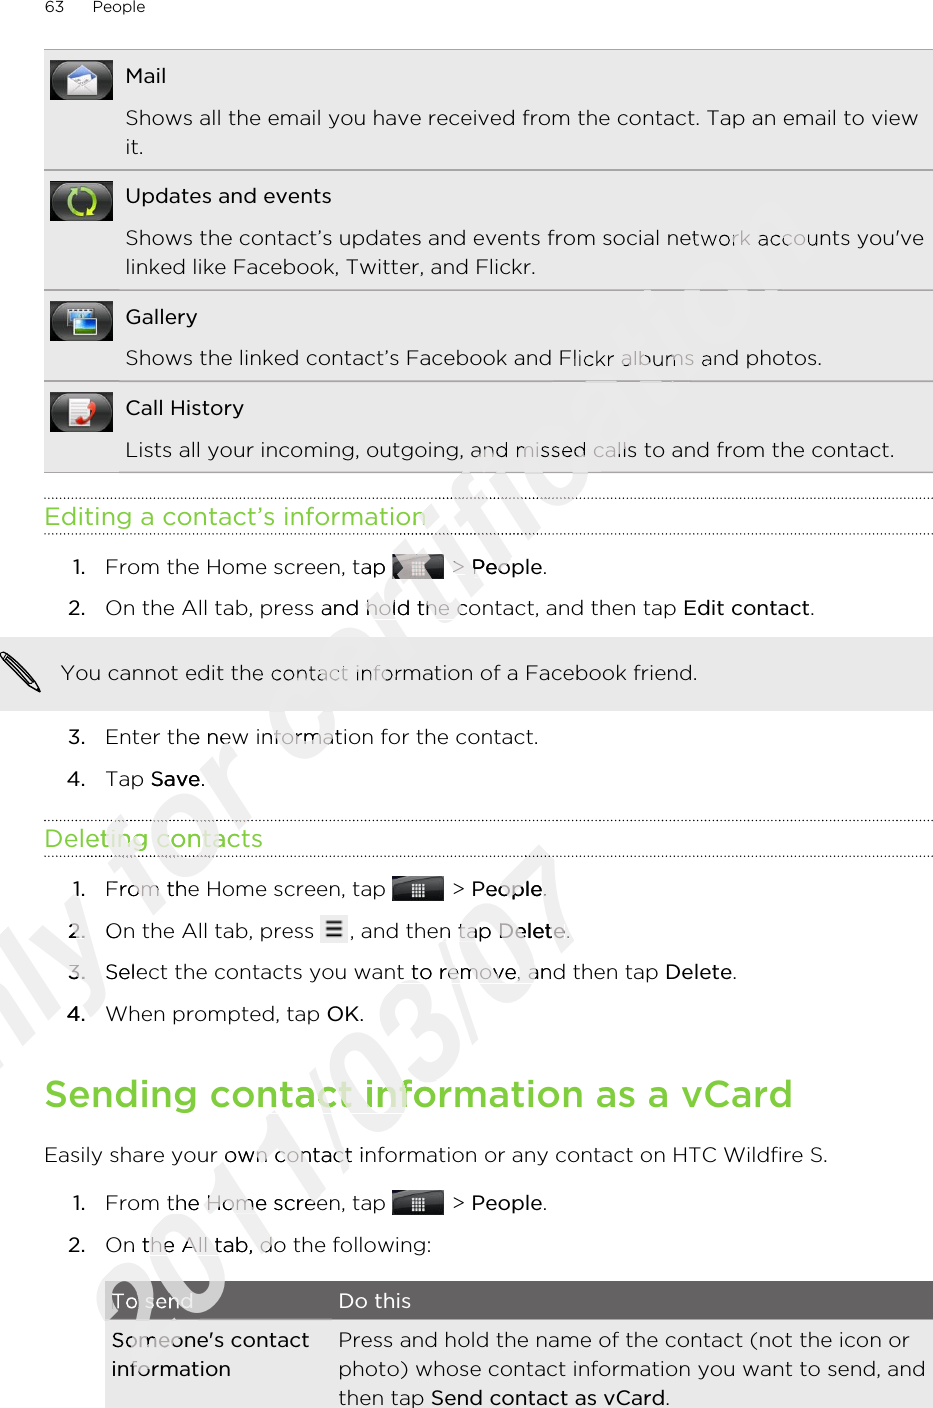 MailShows all the email you have received from the contact. Tap an email to viewit.Updates and eventsShows the contact’s updates and events from social network accounts you&apos;velinked like Facebook, Twitter, and Flickr.GalleryShows the linked contact’s Facebook and Flickr albums and photos.Call HistoryLists all your incoming, outgoing, and missed calls to and from the contact.Editing a contact’s information1. From the Home screen, tap   &gt; People.2. On the All tab, press and hold the contact, and then tap Edit contact. You cannot edit the contact information of a Facebook friend.3. Enter the new information for the contact.4. Tap Save.Deleting contacts1. From the Home screen, tap   &gt; People.2. On the All tab, press  , and then tap Delete.3. Select the contacts you want to remove, and then tap Delete.4. When prompted, tap OK.Sending contact information as a vCardEasily share your own contact information or any contact on HTC Wildfire S.1. From the Home screen, tap   &gt; People.2. On the All tab, do the following:To send Do thisSomeone&apos;s contactinformationPress and hold the name of the contact (not the icon orphoto) whose contact information you want to send, andthen tap Send contact as vCard.63 PeopleOnly 1.Only 1.2.Only 2.On the All tab, press Only On the All tab, press 3.Only 3.Select the contacts you want to remove, and then tap Only Select the contacts you want to remove, and then tap 4.Only 4.for Enter the new information for the contact.for Enter the new information for the contact.Savefor Save.for .Deleting contactsfor Deleting contactsfor for for From the Home screen, tap for From the Home screen, tap certification certification Shows the contact’s updates and events from social network accounts you&apos;vecertification Shows the contact’s updates and events from social network accounts you&apos;veShows the linked contact’s Facebook and Flickr albums and photos.certification Shows the linked contact’s Facebook and Flickr albums and photos.Lists all your incoming, outgoing, and missed calls to and from the contact.certification Lists all your incoming, outgoing, and missed calls to and from the contact.certification certification certification Editing a contact’s informationcertification Editing a contact’s informationcertification certification From the Home screen, tap certification From the Home screen, tap certification  &gt; certification  &gt; Peoplecertification PeopleOn the All tab, press and hold the contact, and then tap certification On the All tab, press and hold the contact, and then tap certification You cannot edit the contact information of a Facebook friend.certification You cannot edit the contact information of a Facebook friend.Enter the new information for the contact.certification Enter the new information for the contact.2011/03/072011/03/072011/03/07People2011/03/07People.2011/03/07., and then tap 2011/03/07, and then tap Delete2011/03/07Delete.2011/03/07.Select the contacts you want to remove, and then tap 2011/03/07Select the contacts you want to remove, and then tap OK2011/03/07OK.2011/03/07.Sending contact information as a vCard2011/03/07Sending contact information as a vCard2011/03/07Easily share your own contact information or any contact on HTC Wildfire S.2011/03/07Easily share your own contact information or any contact on HTC Wildfire S.From the Home screen, tap 2011/03/07From the Home screen, tap On the All tab, do the following:2011/03/07On the All tab, do the following:2011/03/072011/03/07To send2011/03/07To sendSomeone&apos;s contact2011/03/07Someone&apos;s contactinformation2011/03/07information2011/03/07